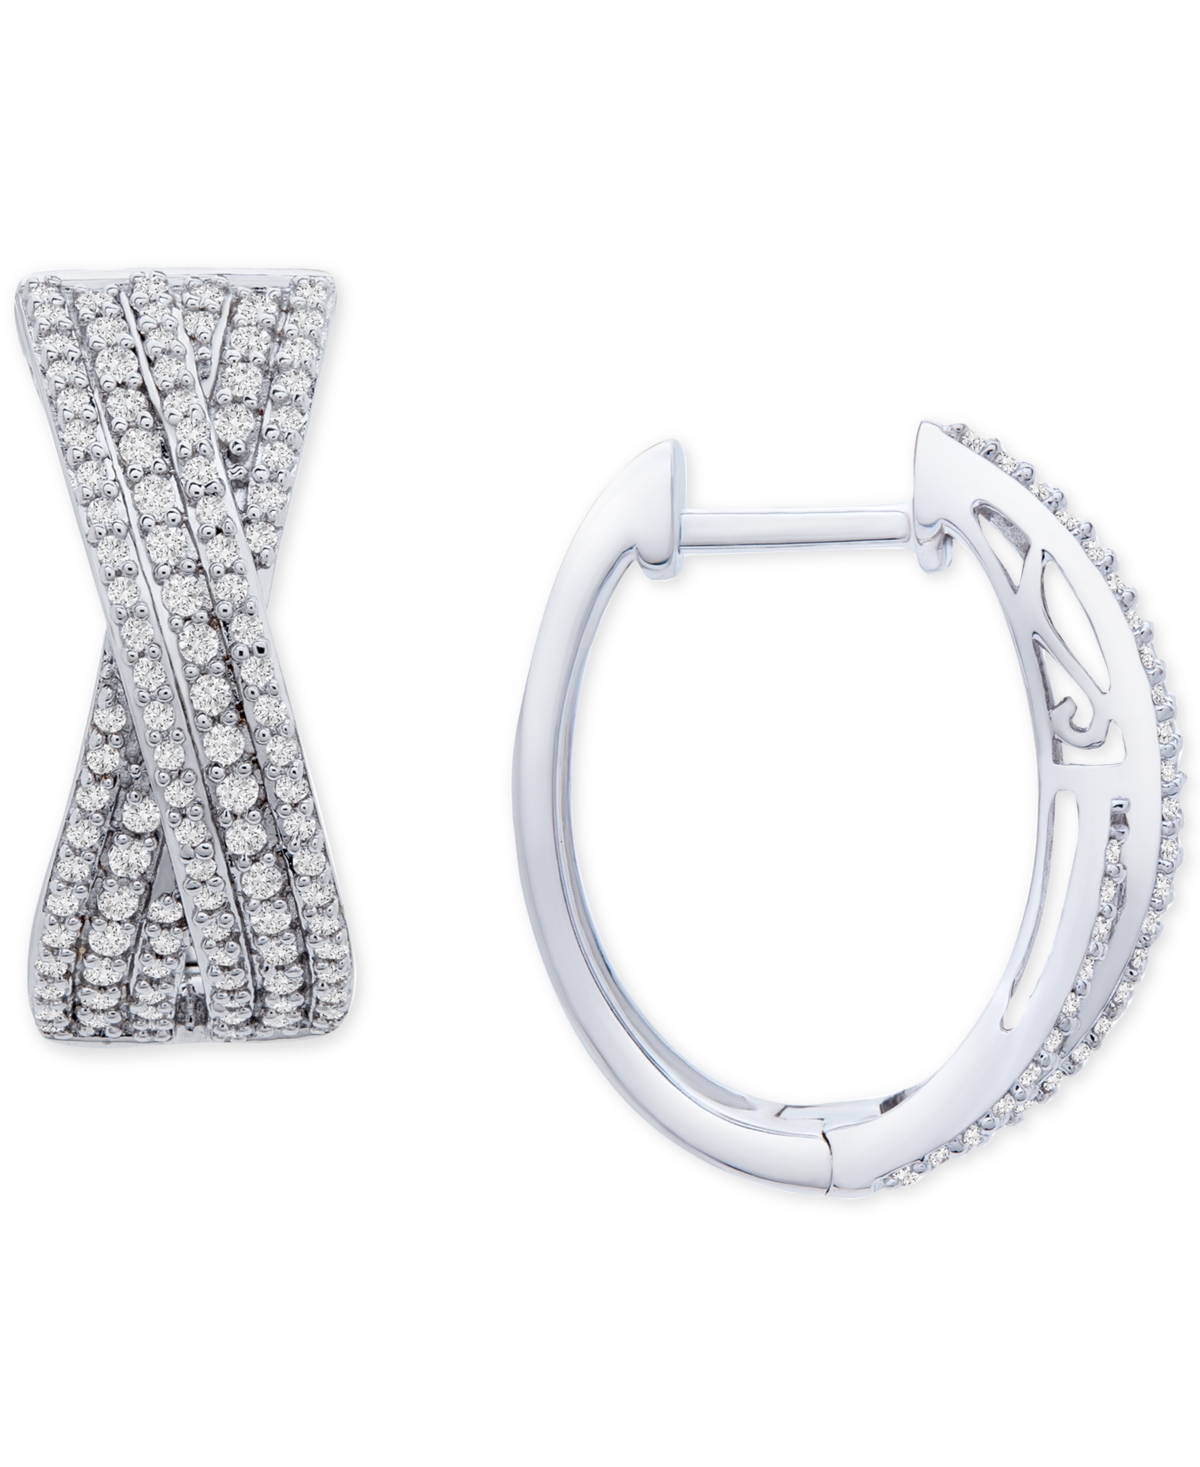 Diamond Crossover Oval Hoop Earrings (1 ct. t.w.) in Sterling Silver, Created for Macy's - Sterling Silver